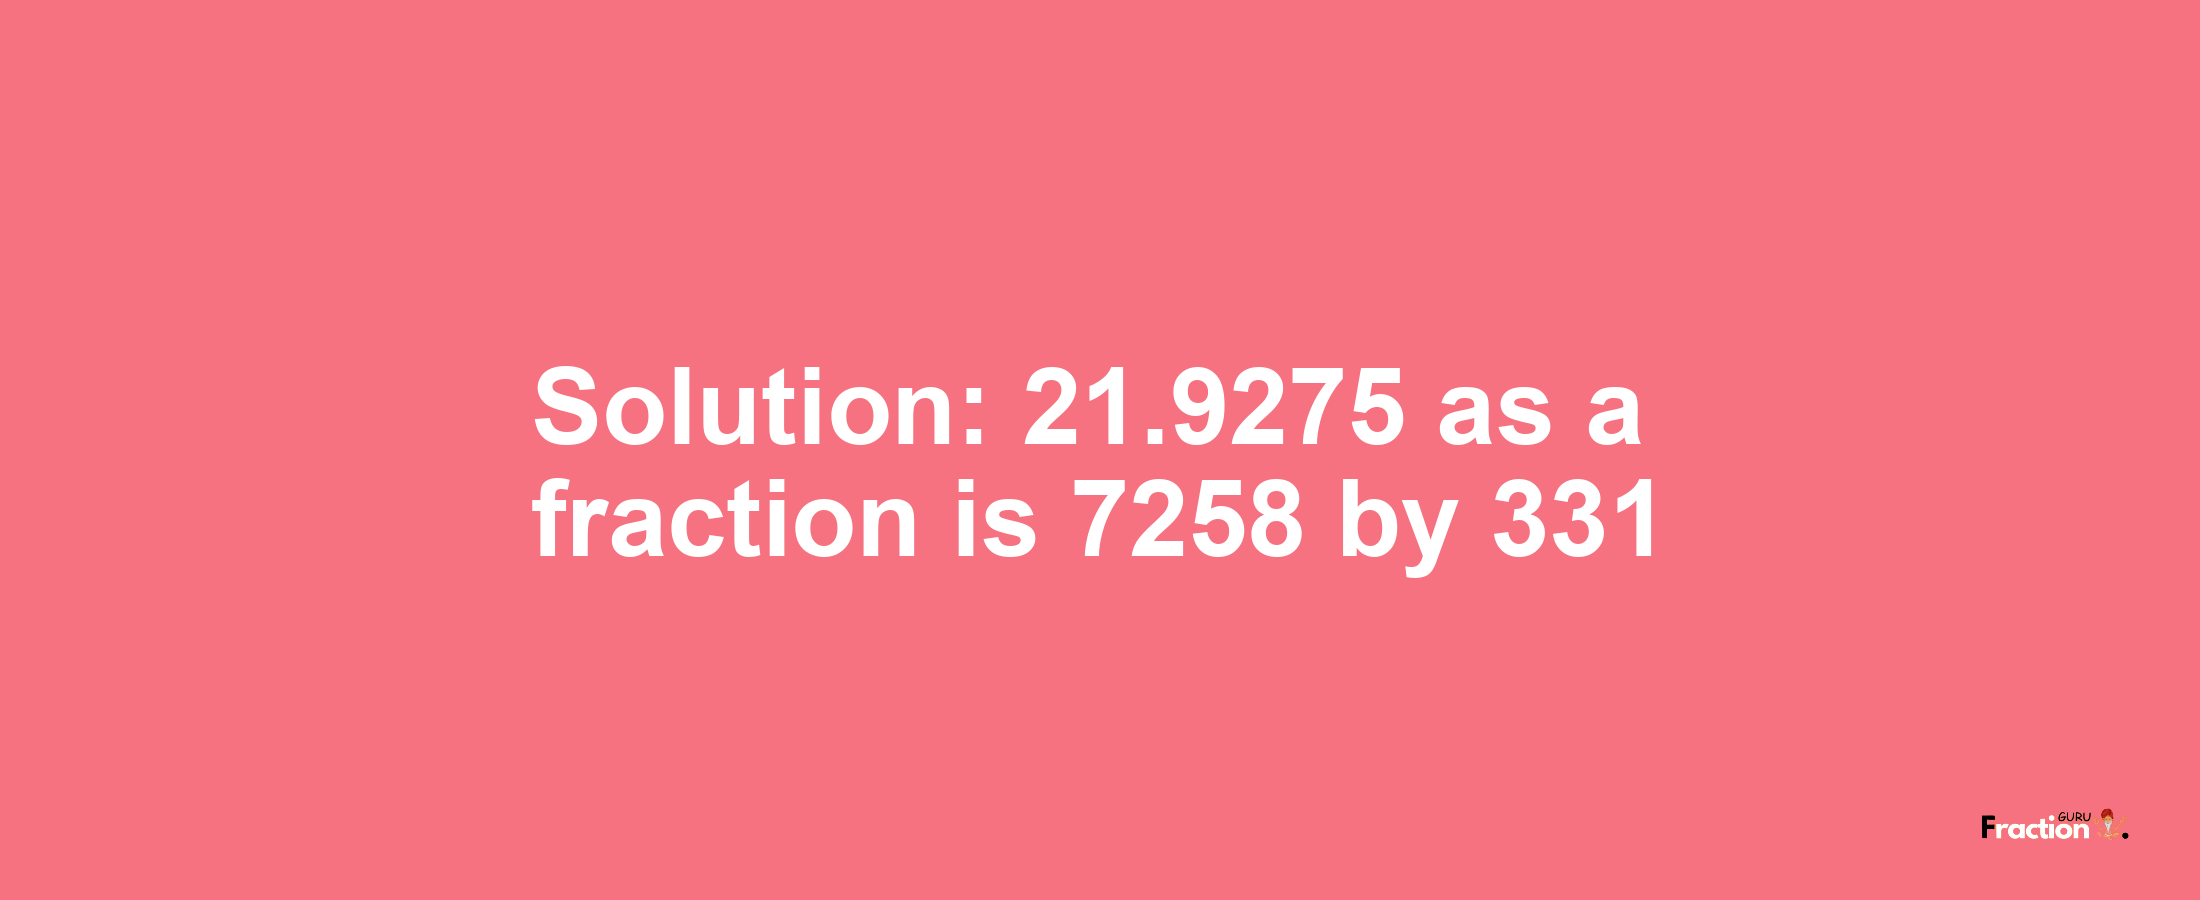 Solution:21.9275 as a fraction is 7258/331